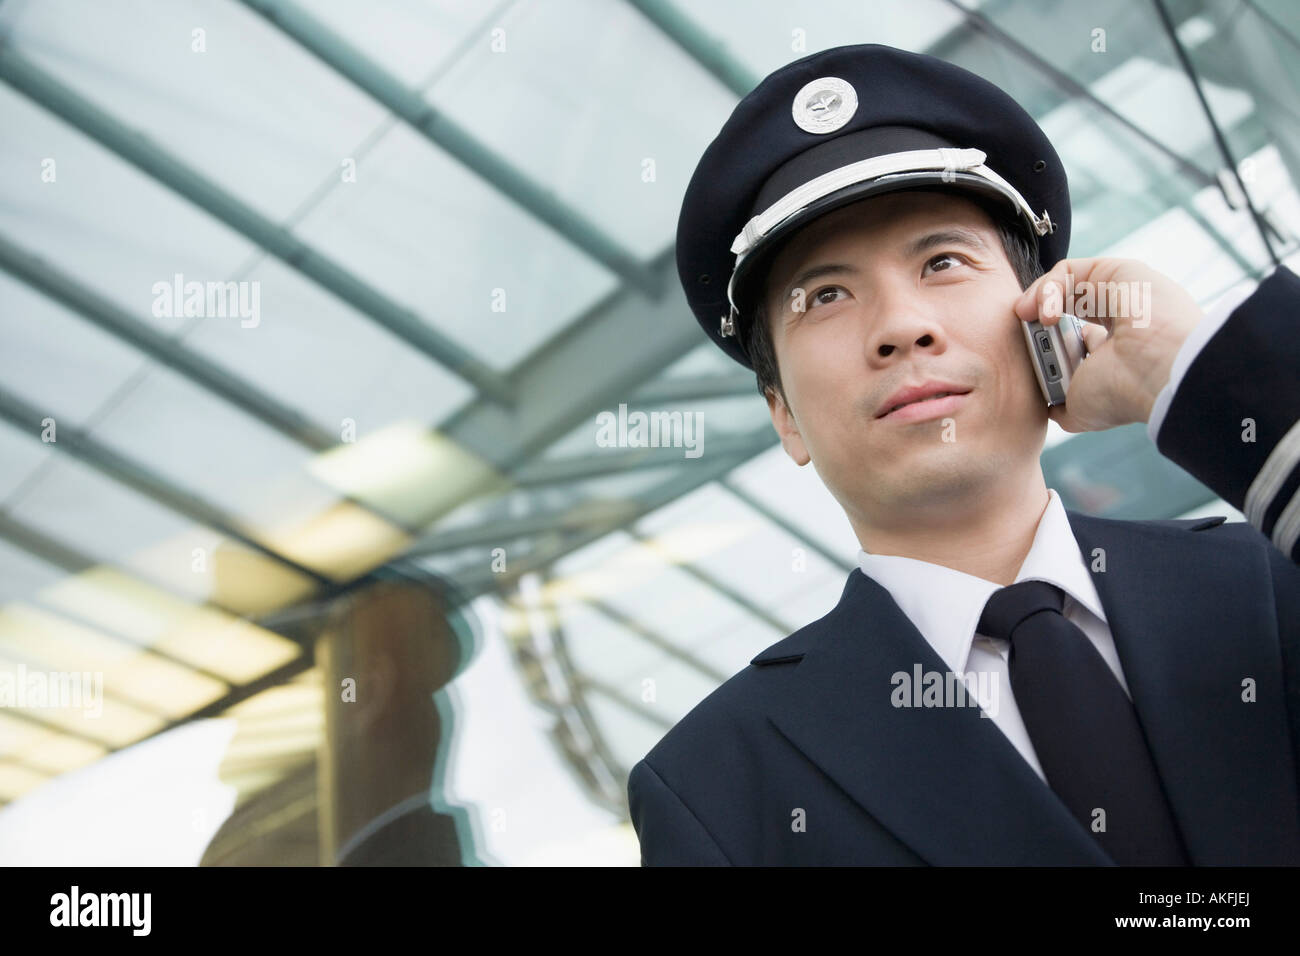 Close-up of a pilot talking on a mobile phone Stock Photo